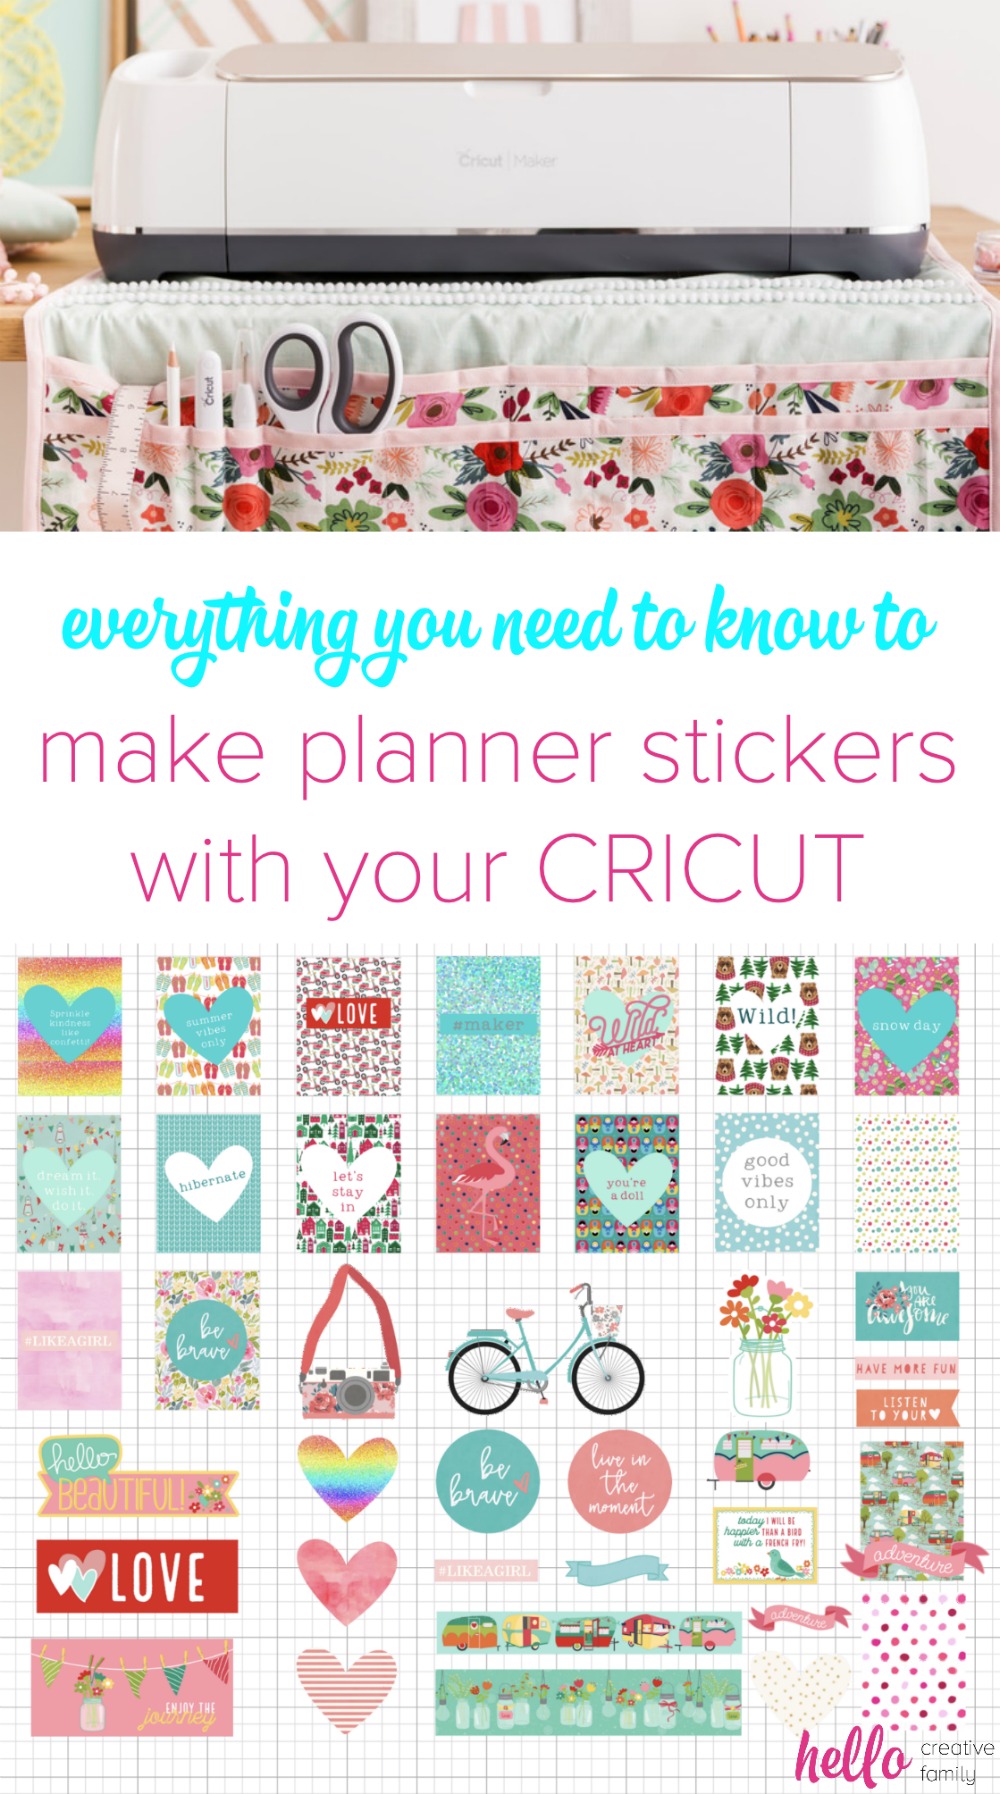 Love planners? Have a Cricut? We're sharing everything you need to know to make DIY planner stickers with your Cricut. With this step by step tutorial we're sharing how easy it is to use the print and cut function in Cricut Design Space to create amazing custom and personalized planner stickers! Perfect for whether you use a Happy Planners, Bullet Journal, Lily Pulitzer or any other planner out there! #Planners #HappyPlanner #Cricut #BulletJournal #PlannerAccessories #PlannerAddict